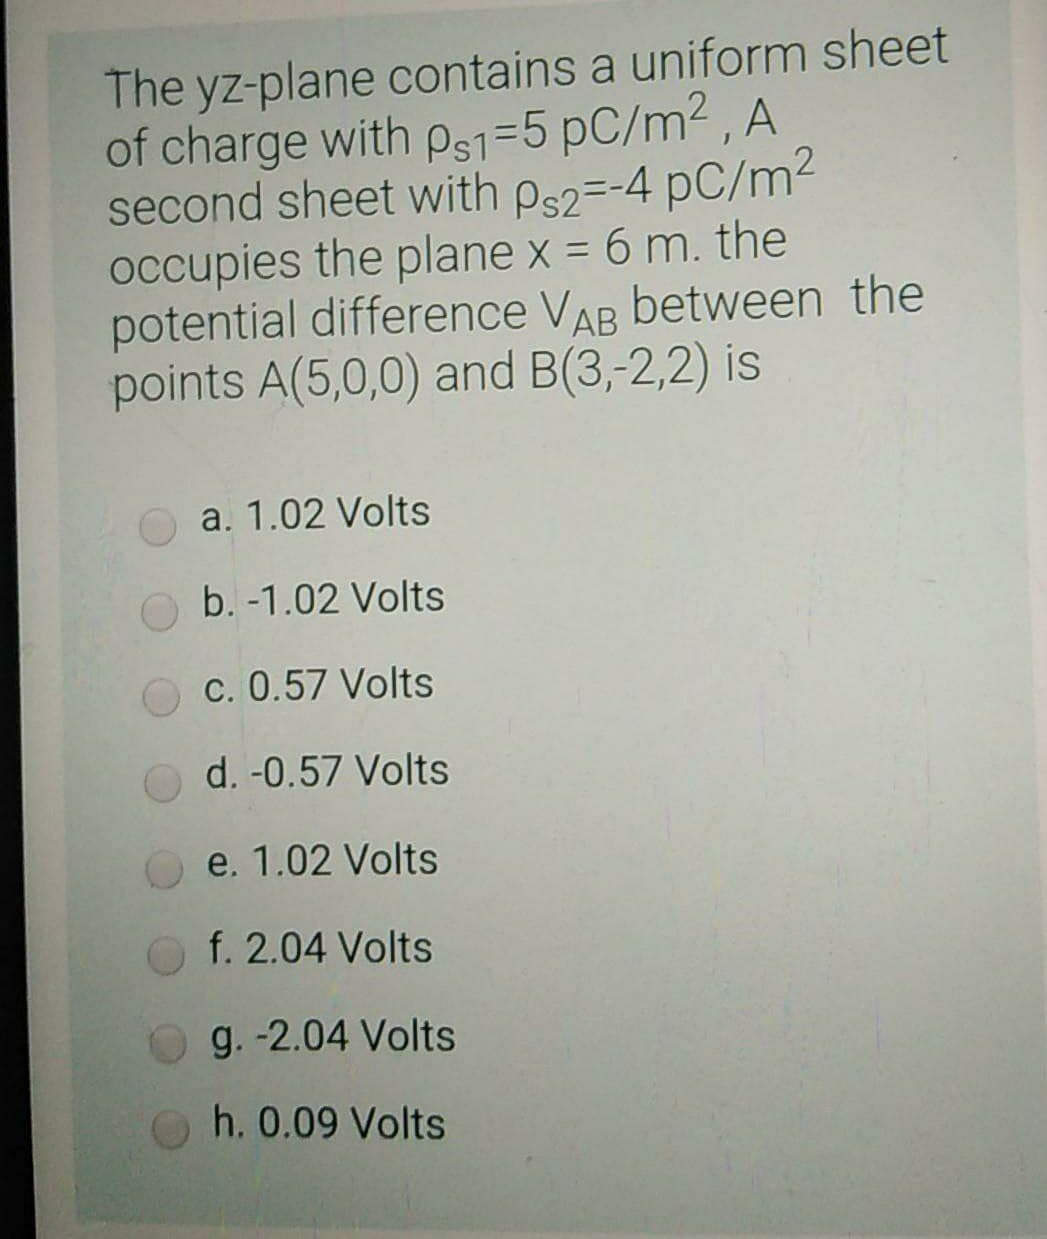 The yz-plane contains a uniform sheet
of charge with ps1=5 pC/m2 , A
second sheet with ps2=-4 pC/m²
occupies the plane x = 6 m. the
potential difference VAR between the
points A(5,0,0) and B(3,-2,2) is
a. 1.02 Volts
b. -1.02 Volts
O c. 0.57 Volts
d. -0.57 Volts
e. 1.02 Volts
f. 2.04 Volts
g. -2.04 Volts
h. 0.09 Volts
